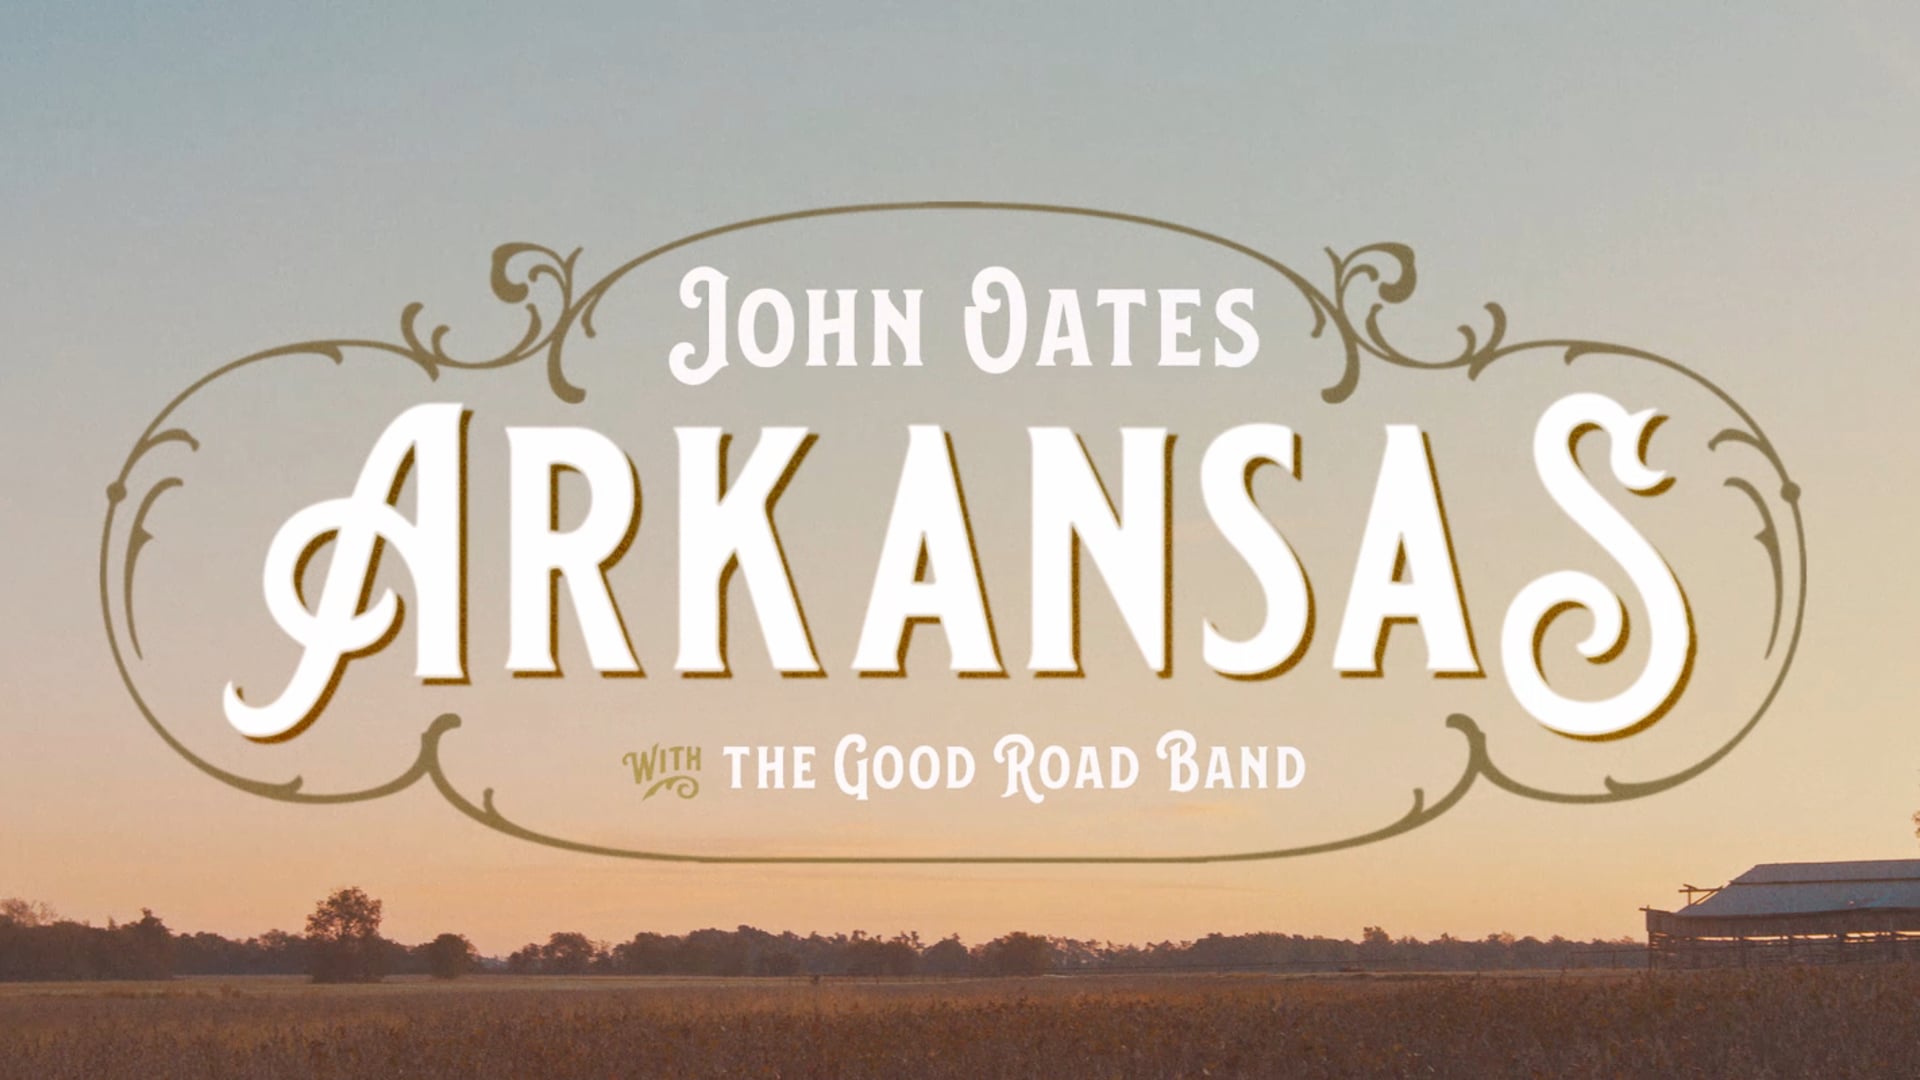 John Oates with The Good Road Band - Arkansas (Music Video)